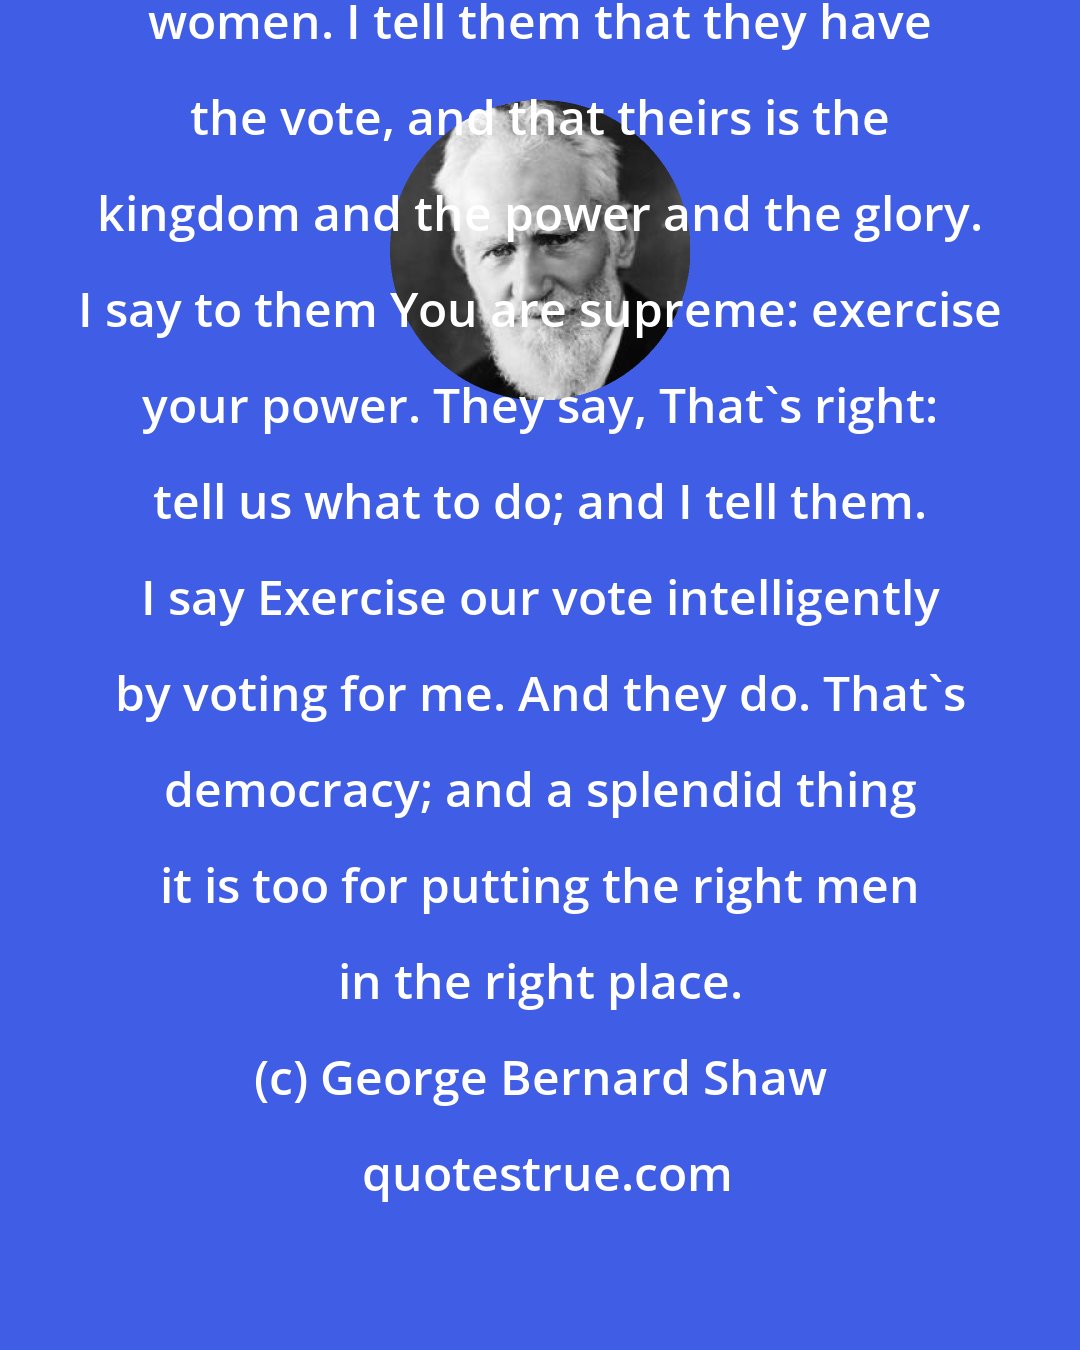 George Bernard Shaw: I talk democracy to these men and women. I tell them that they have the vote, and that theirs is the kingdom and the power and the glory. I say to them You are supreme: exercise your power. They say, That's right: tell us what to do; and I tell them. I say Exercise our vote intelligently by voting for me. And they do. That's democracy; and a splendid thing it is too for putting the right men in the right place.